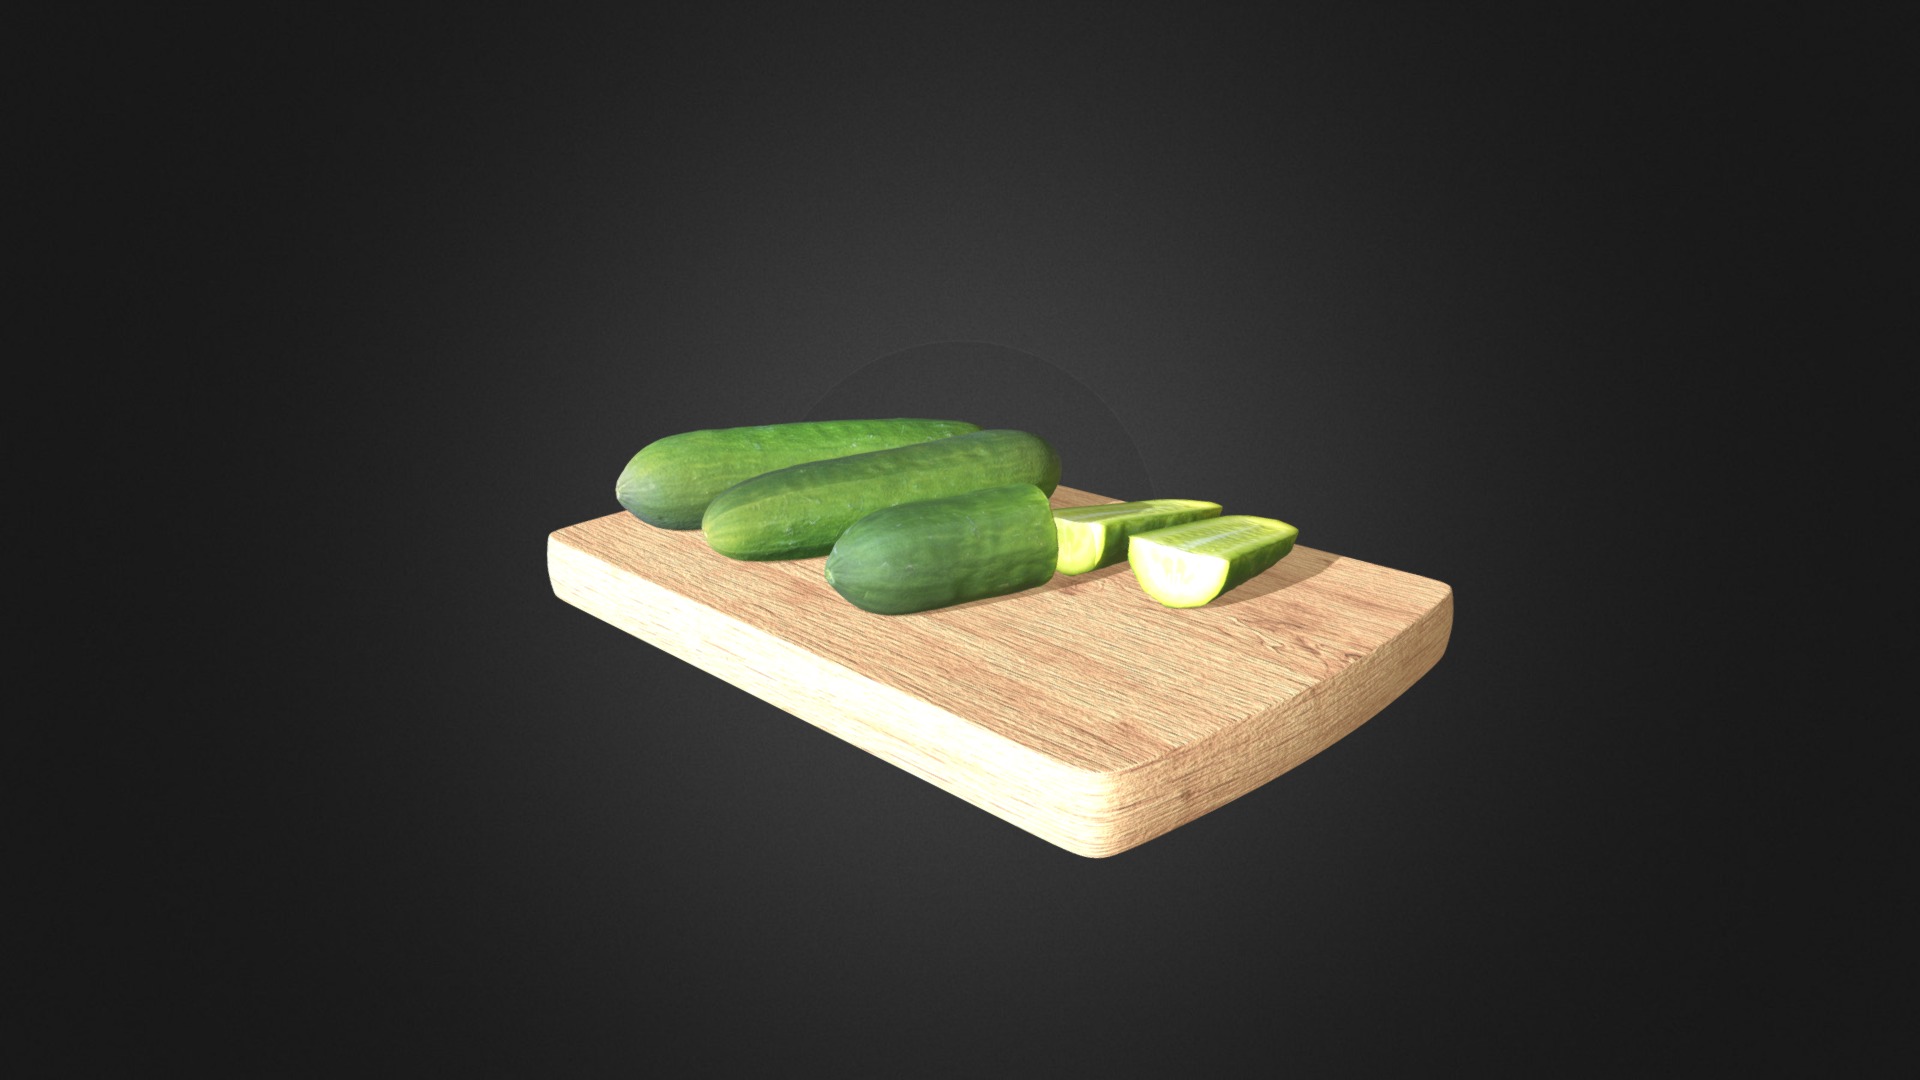 3D model Cucumbers - This is a 3D model of the Cucumbers. The 3D model is about a group of green leaves on a wooden board.